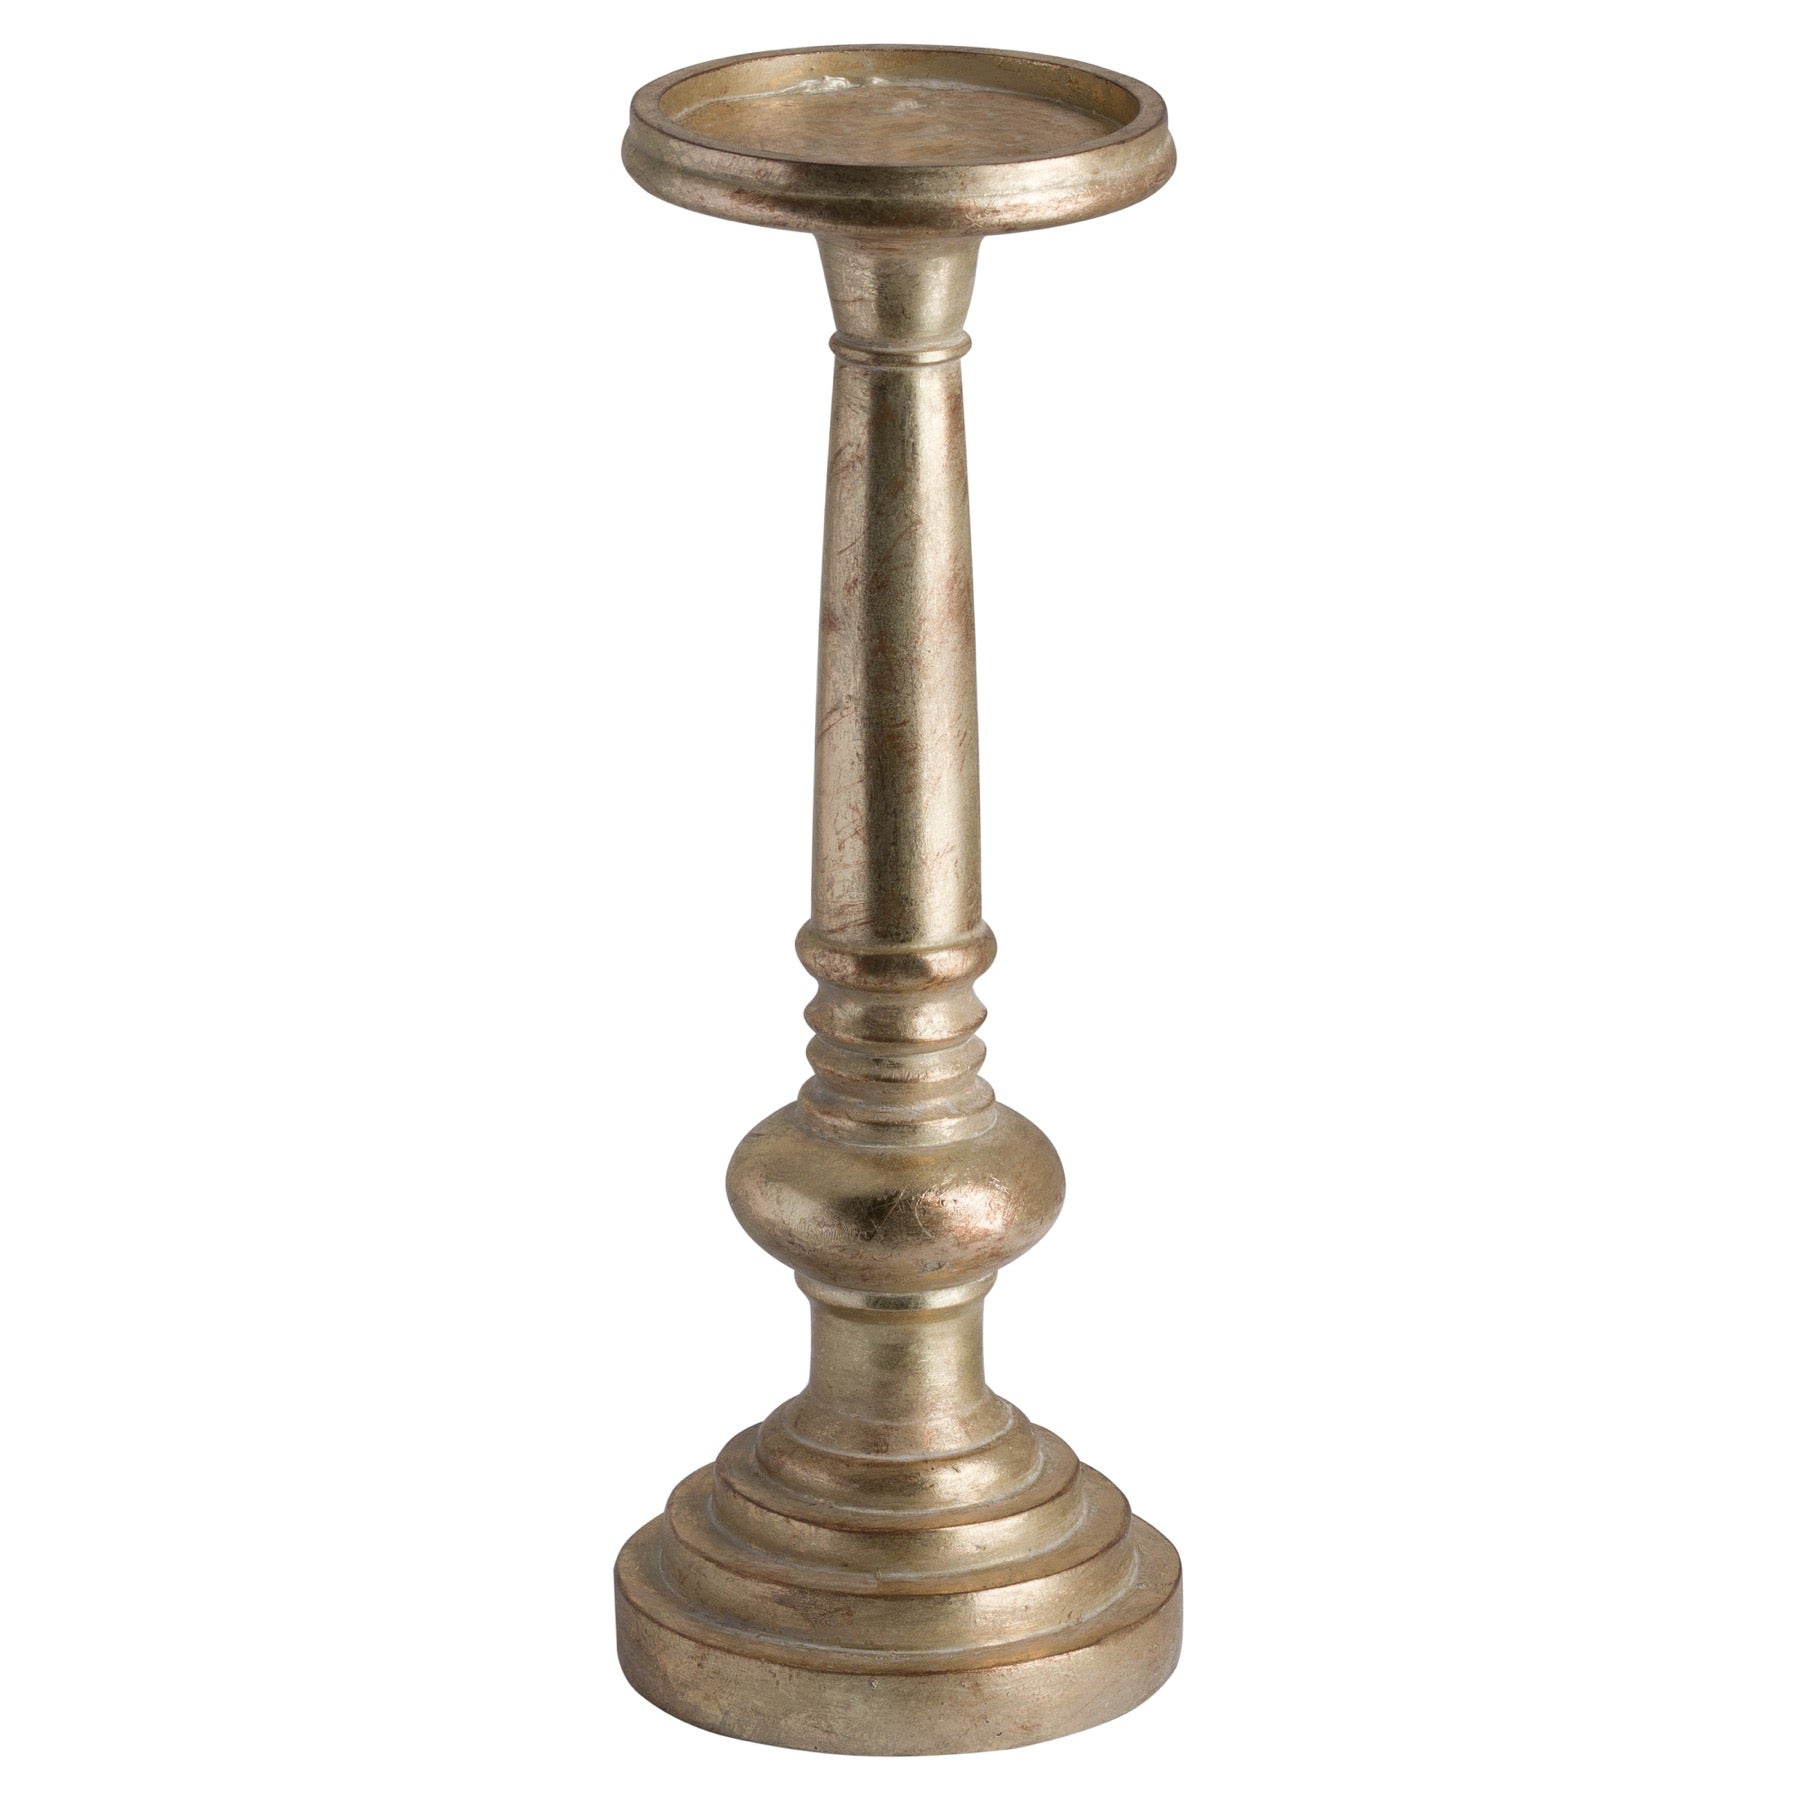 View Antique Brass Effect Candle Holder information